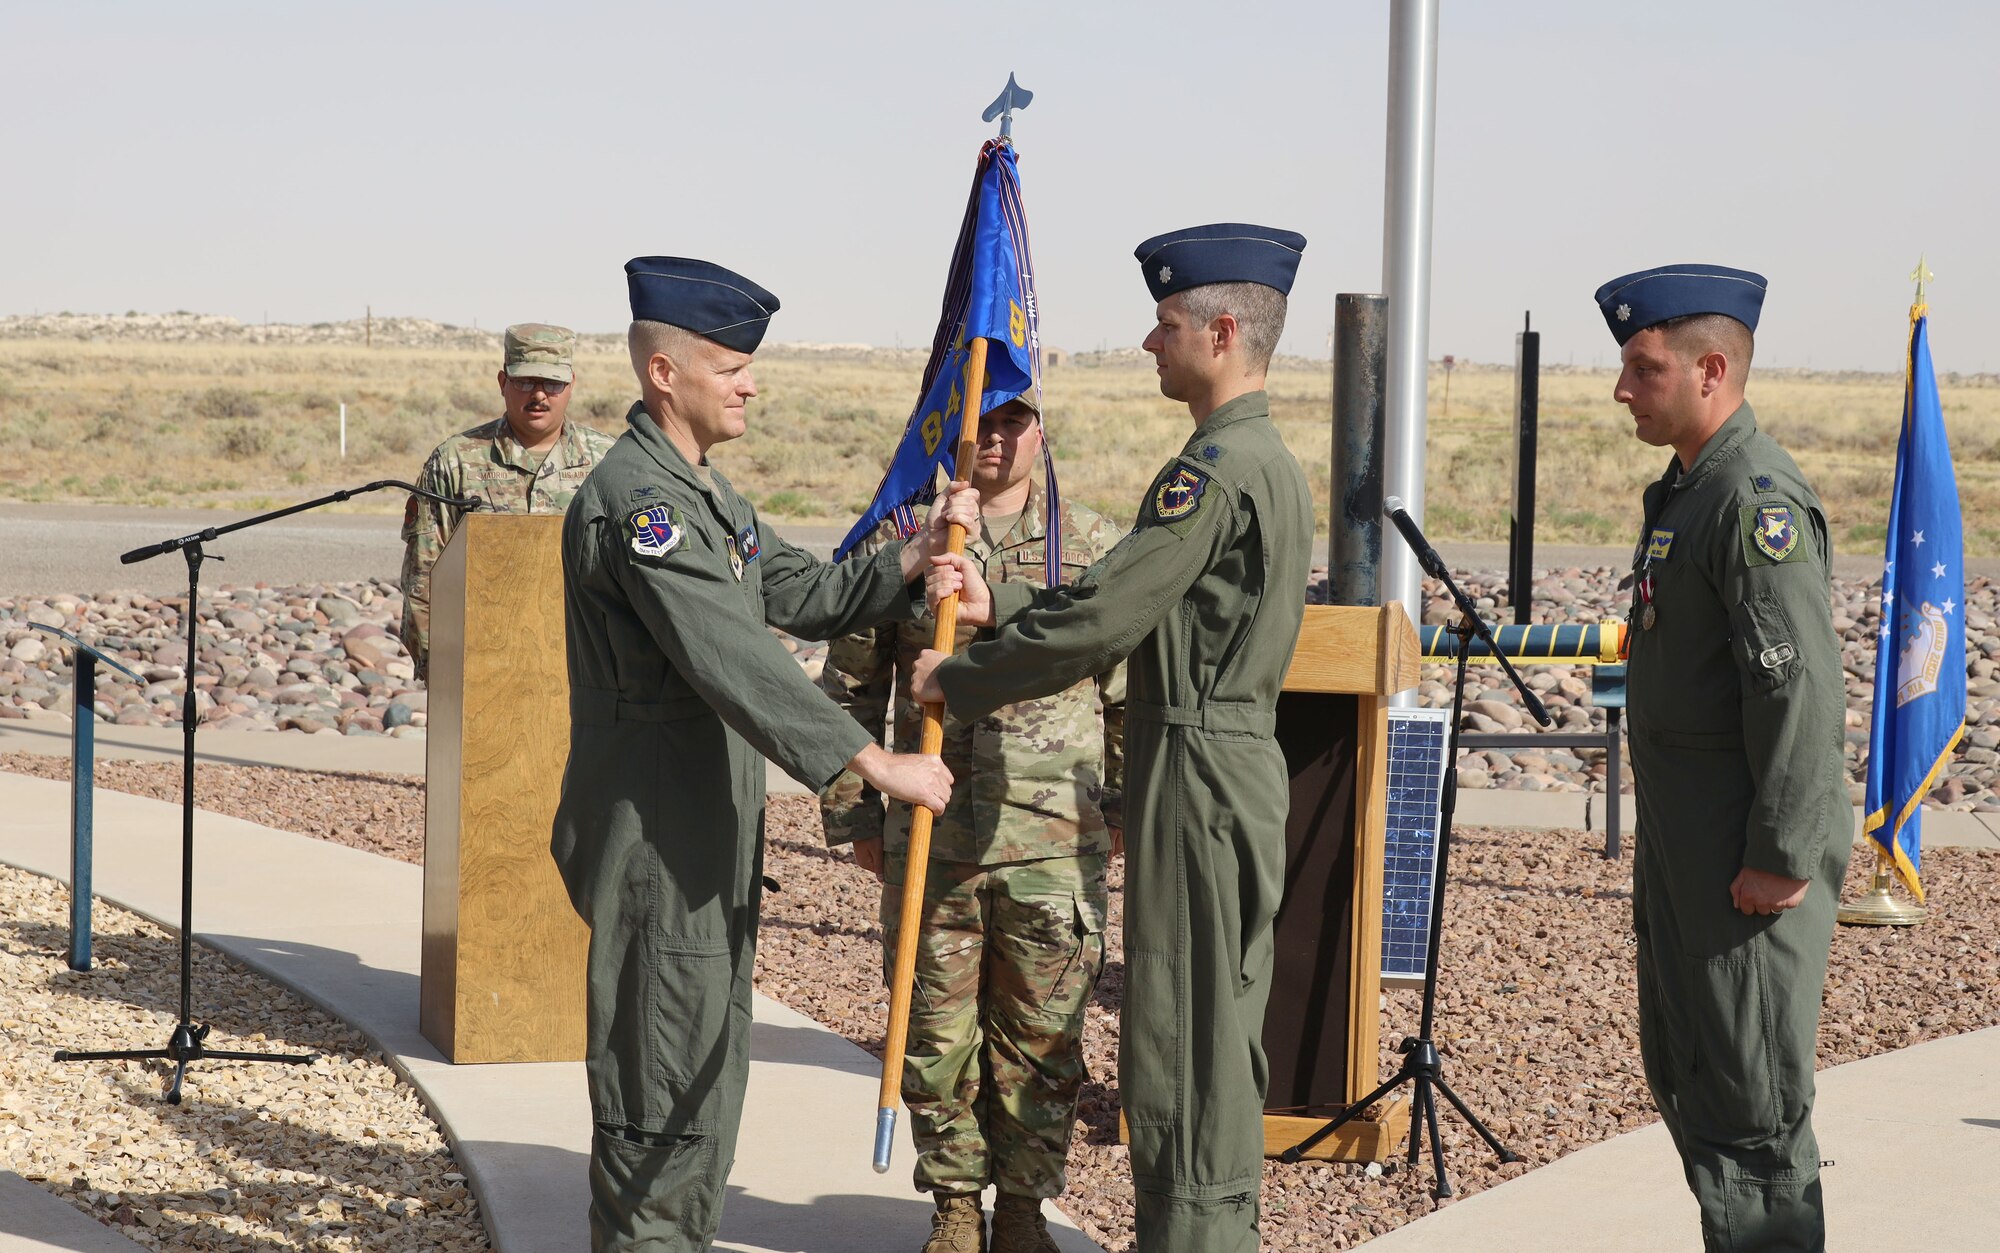 Lt. Col. Jared Rupp, second from right, accepts the guidon for the 846th Test Squadron from Col. Darren Wees, 704th Test Group commander, during a Change of Command ceremony June 9, 2022, at the Holloman High Speed Test Track on Holloman Air Force Base, N.M. Rupp assumed command of the 846 TS, the squadron that operates the HHSTT. The mission of the 846 TS is to plan and execute world-class rocket sled tests enabling weapon system development in support of the warfighter. The squadron is part of the 704th Test Group at Holloman, a unit of Arnold Engineering Development Complex, headquartered at Arnold Air Force Base, Tenn. (U.S. Air Force photo by Philip Cooksey)